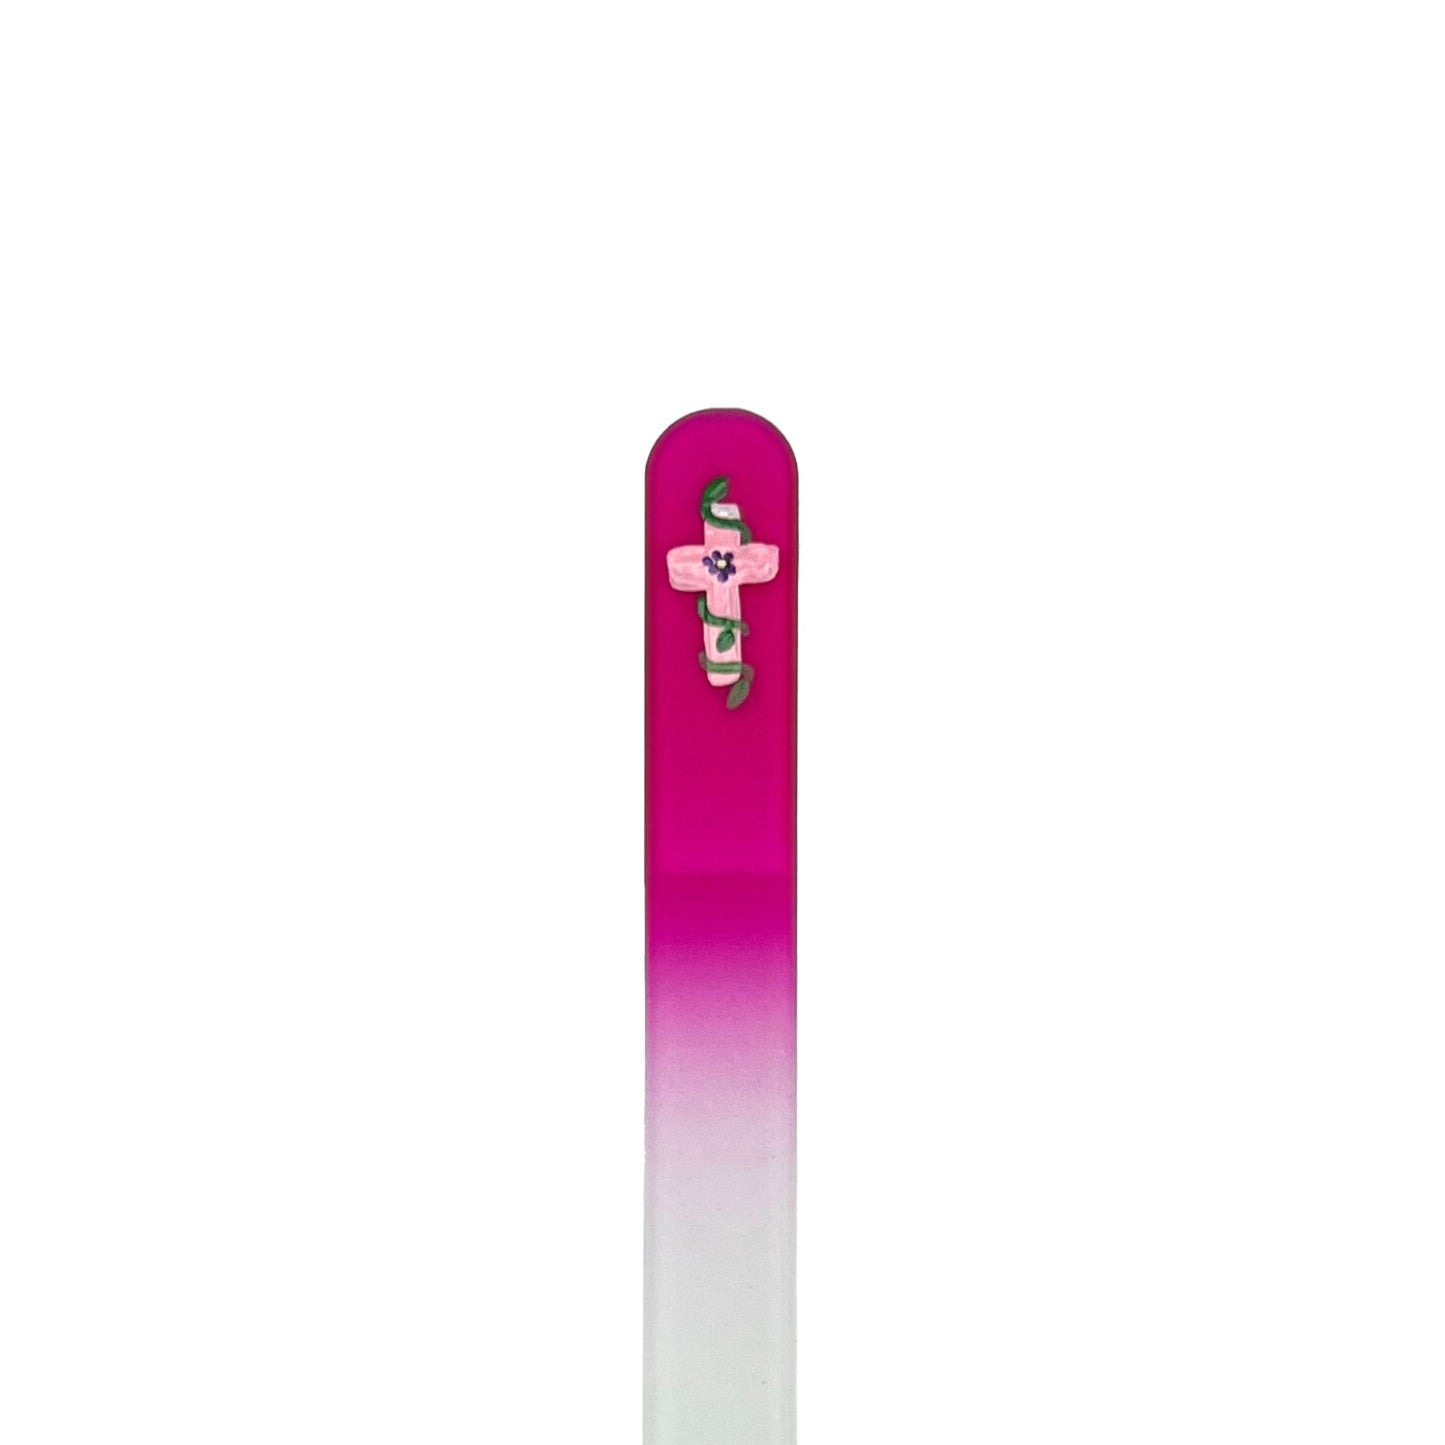 pink glass nail file with hand painted pink cross